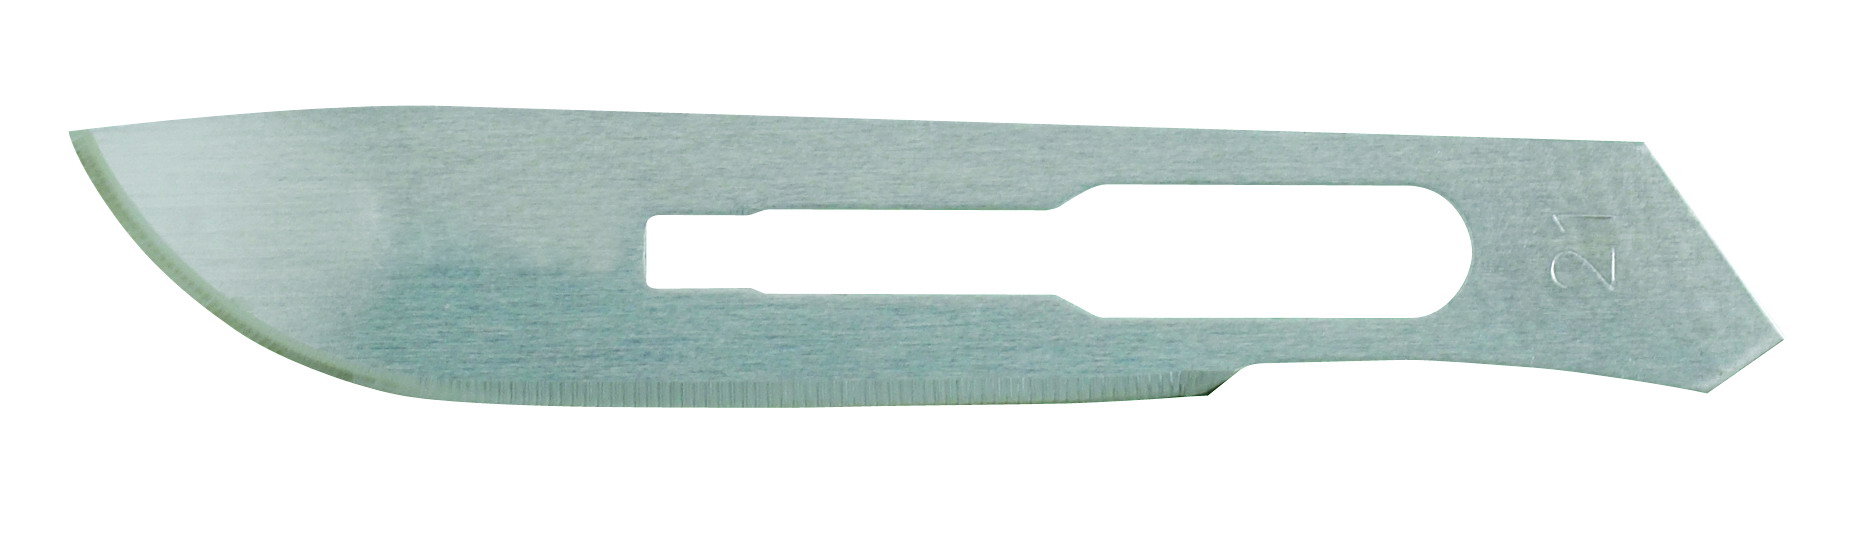 stainless-steel-sterile-surgical-blades-no-21-4-321-miltex.jpg